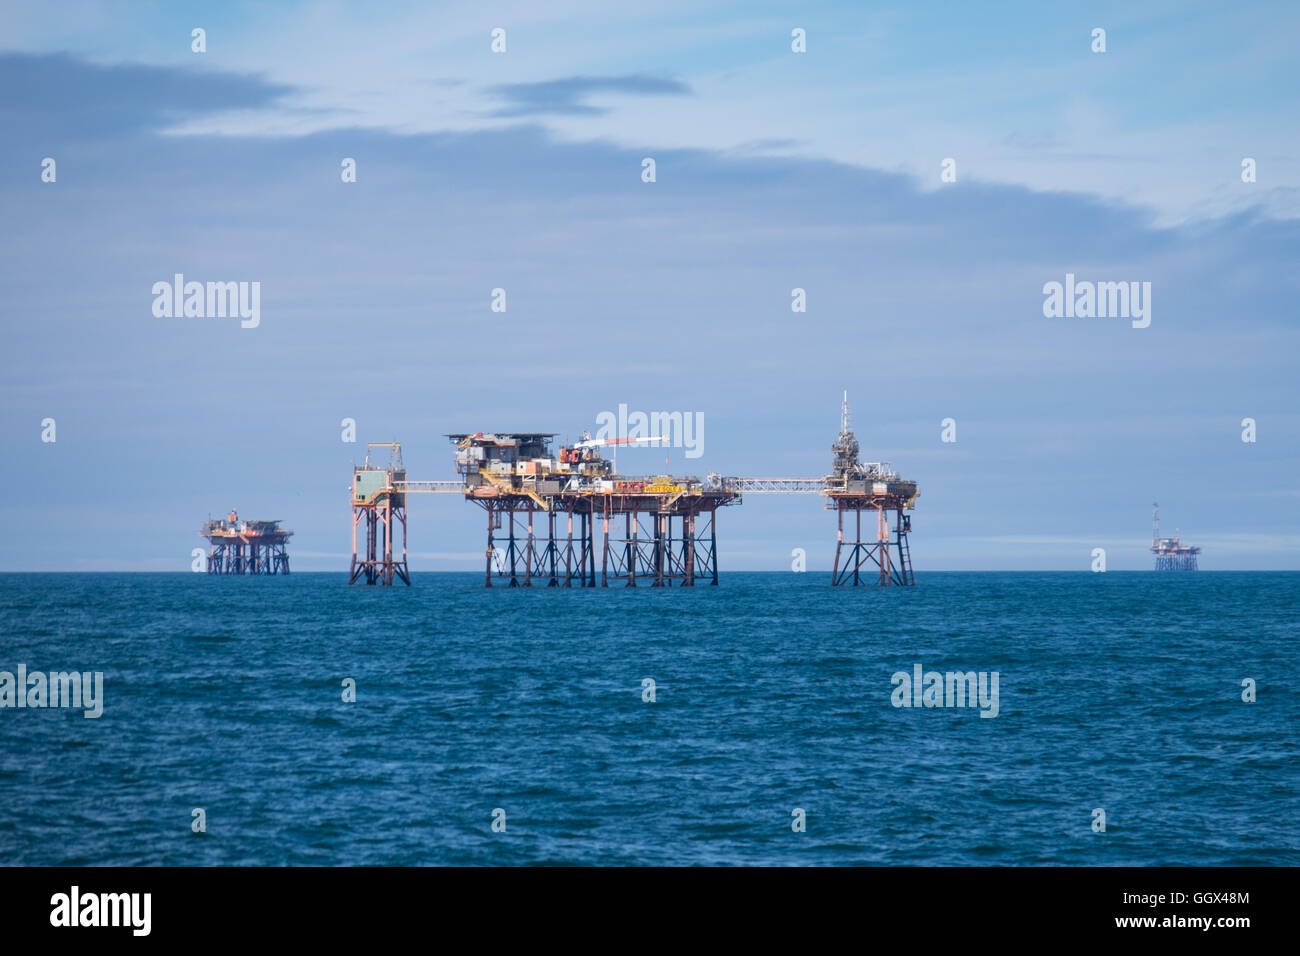 The West Sole A oil platform complex in the North Sea Stock Photo